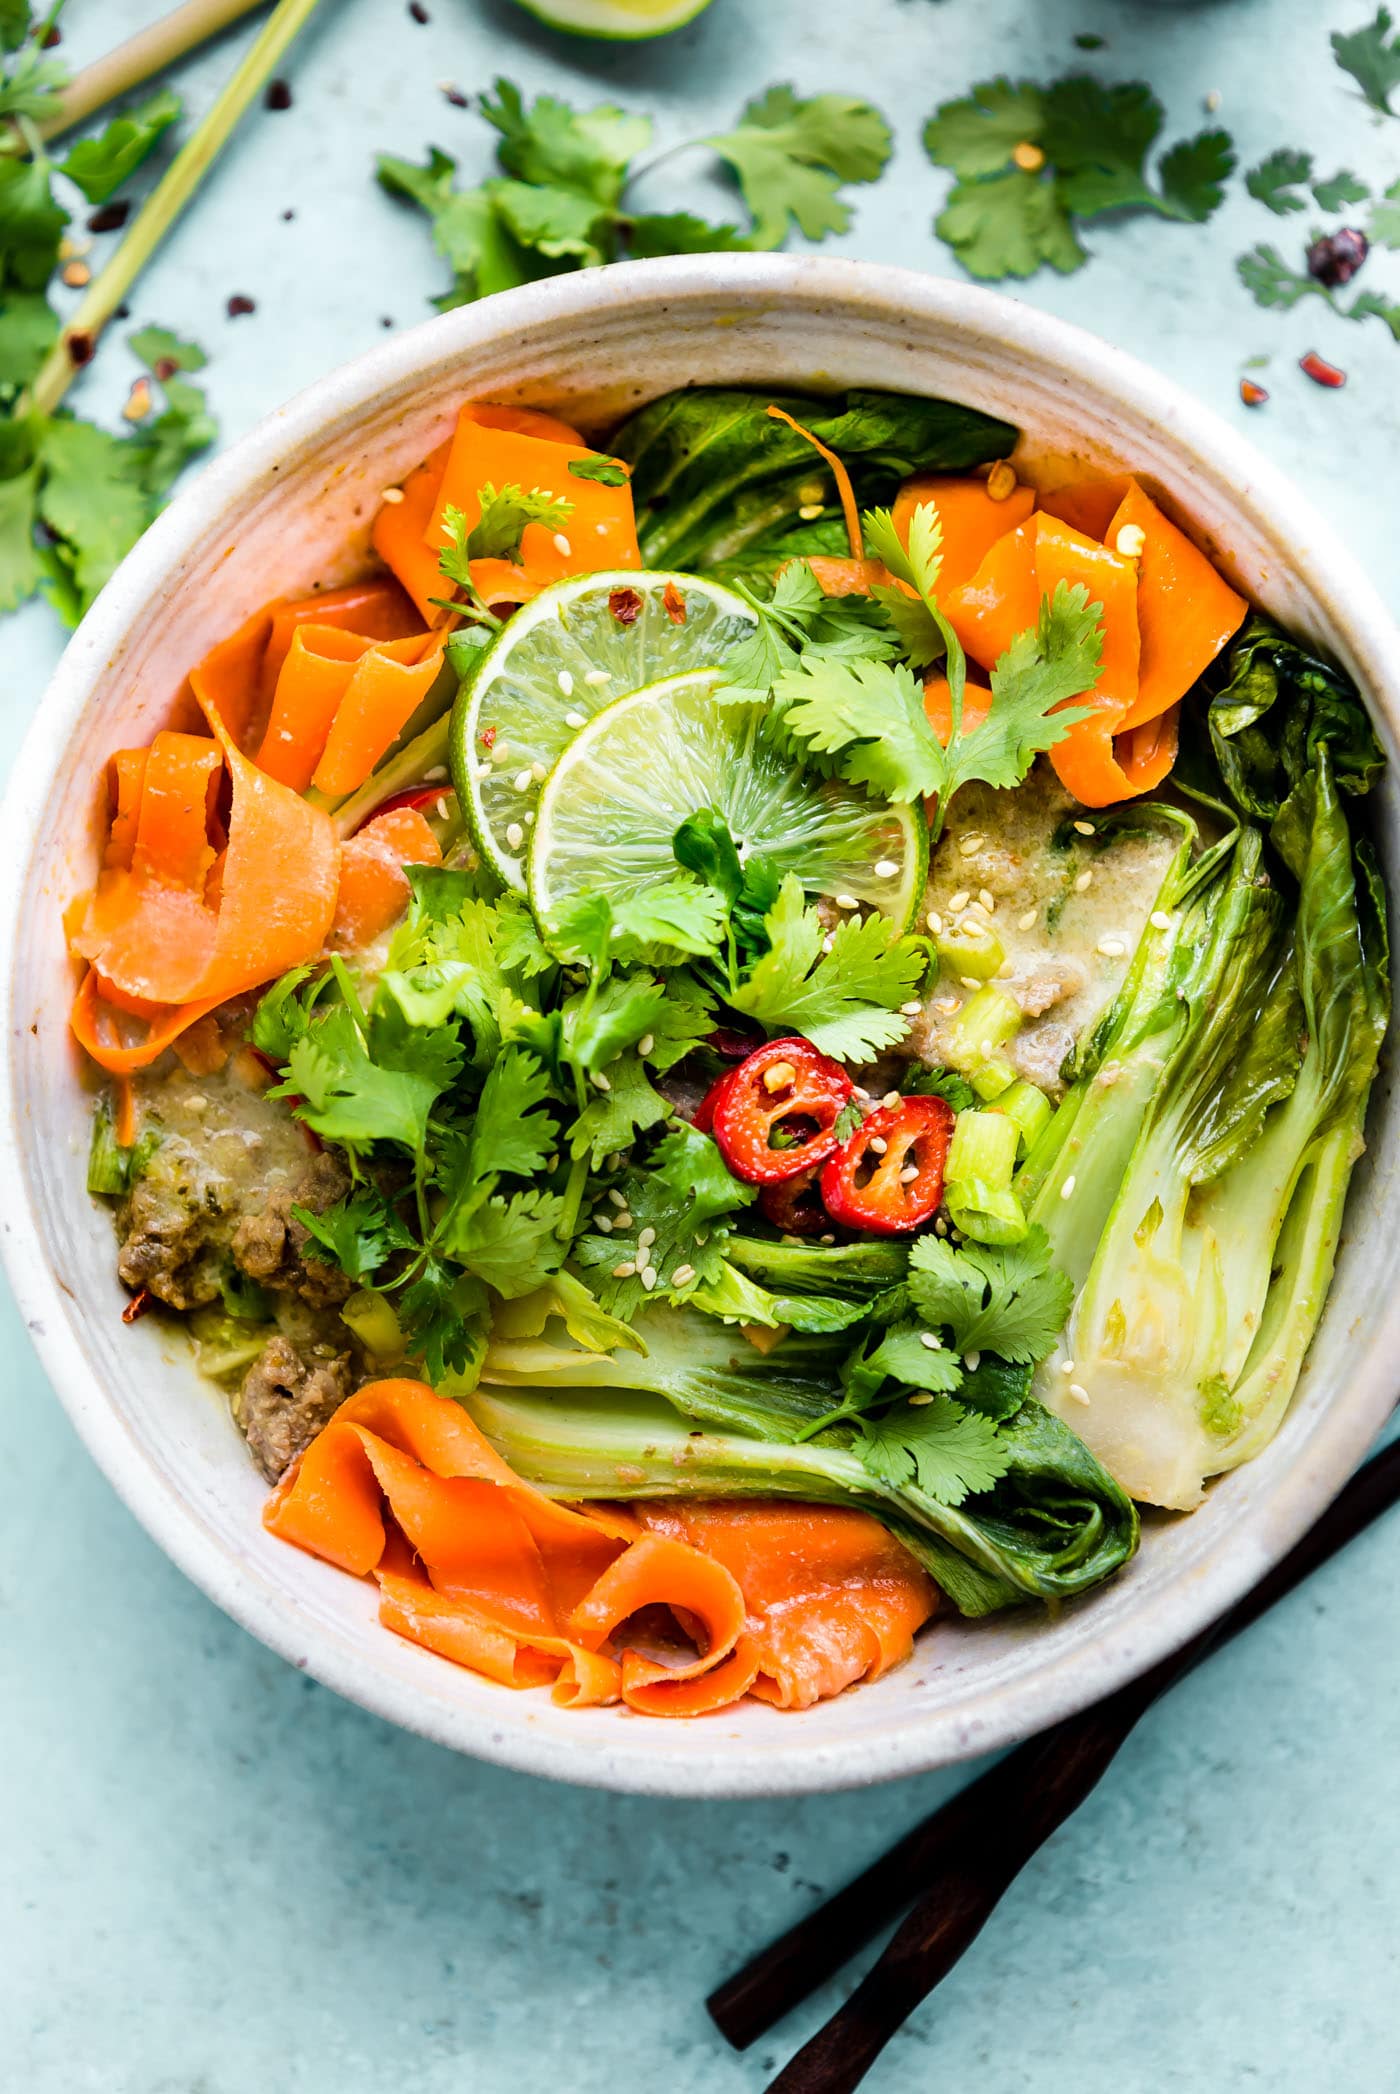 Thai green curry beef and veggies bowl recipe is for both the meat eater and vegetarian palate! A one pot green curry beef recipe that's quick to make and flavorful! No noodles needed, just lots of veggies and a creamy Thai broth! Paleo, Whole 30 friendly